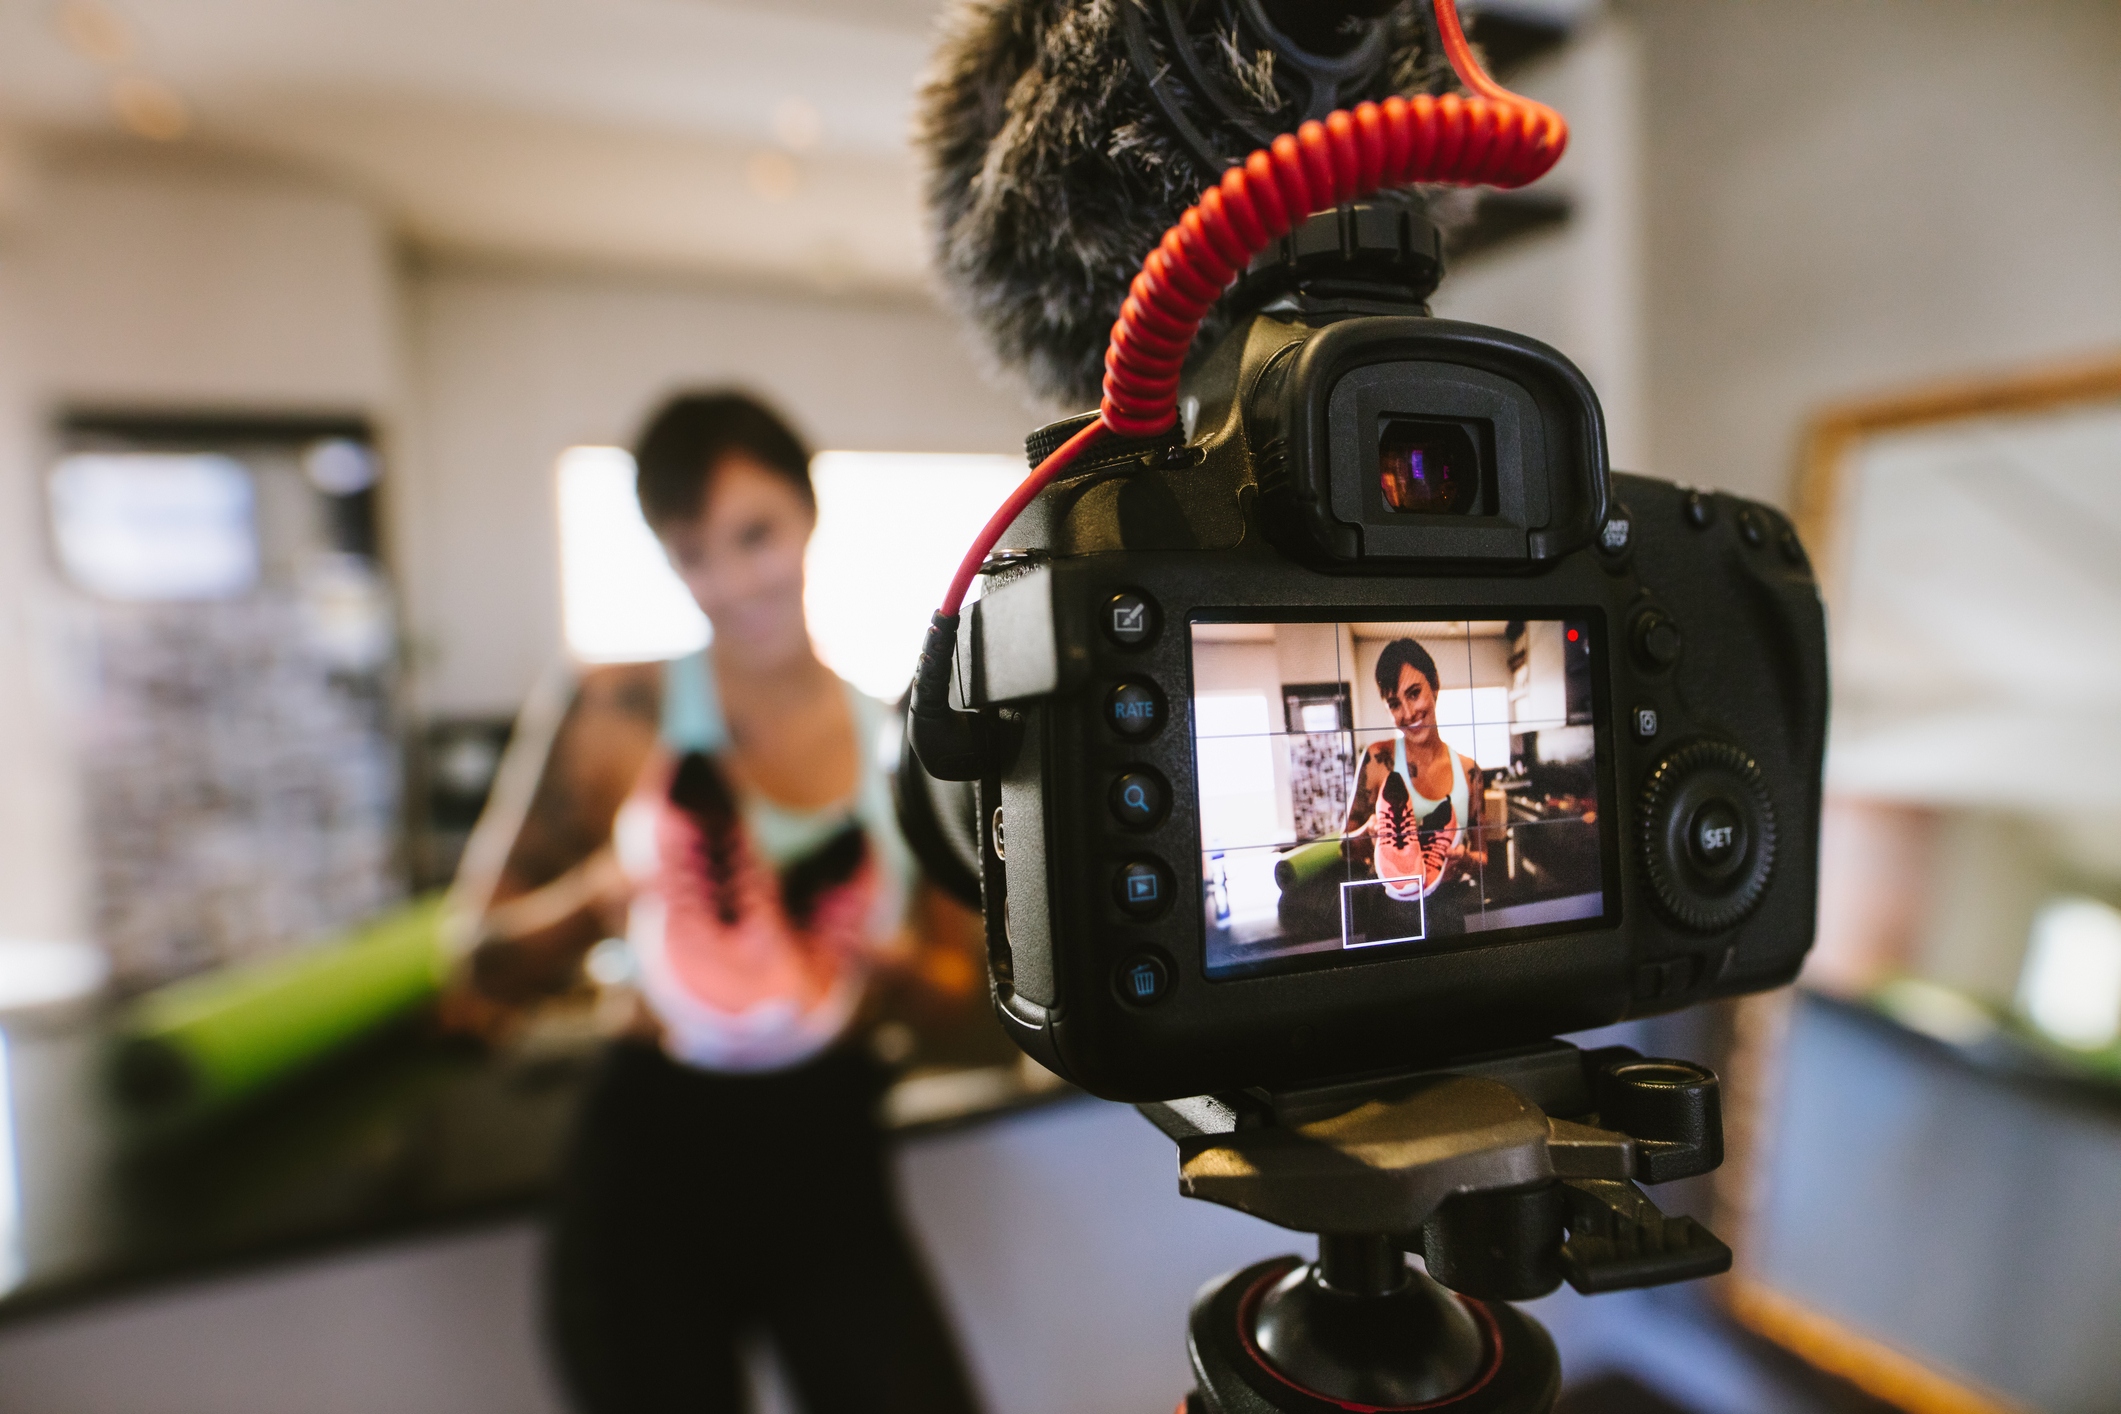 Romanian university offers influencer, blogger and vlogger courses